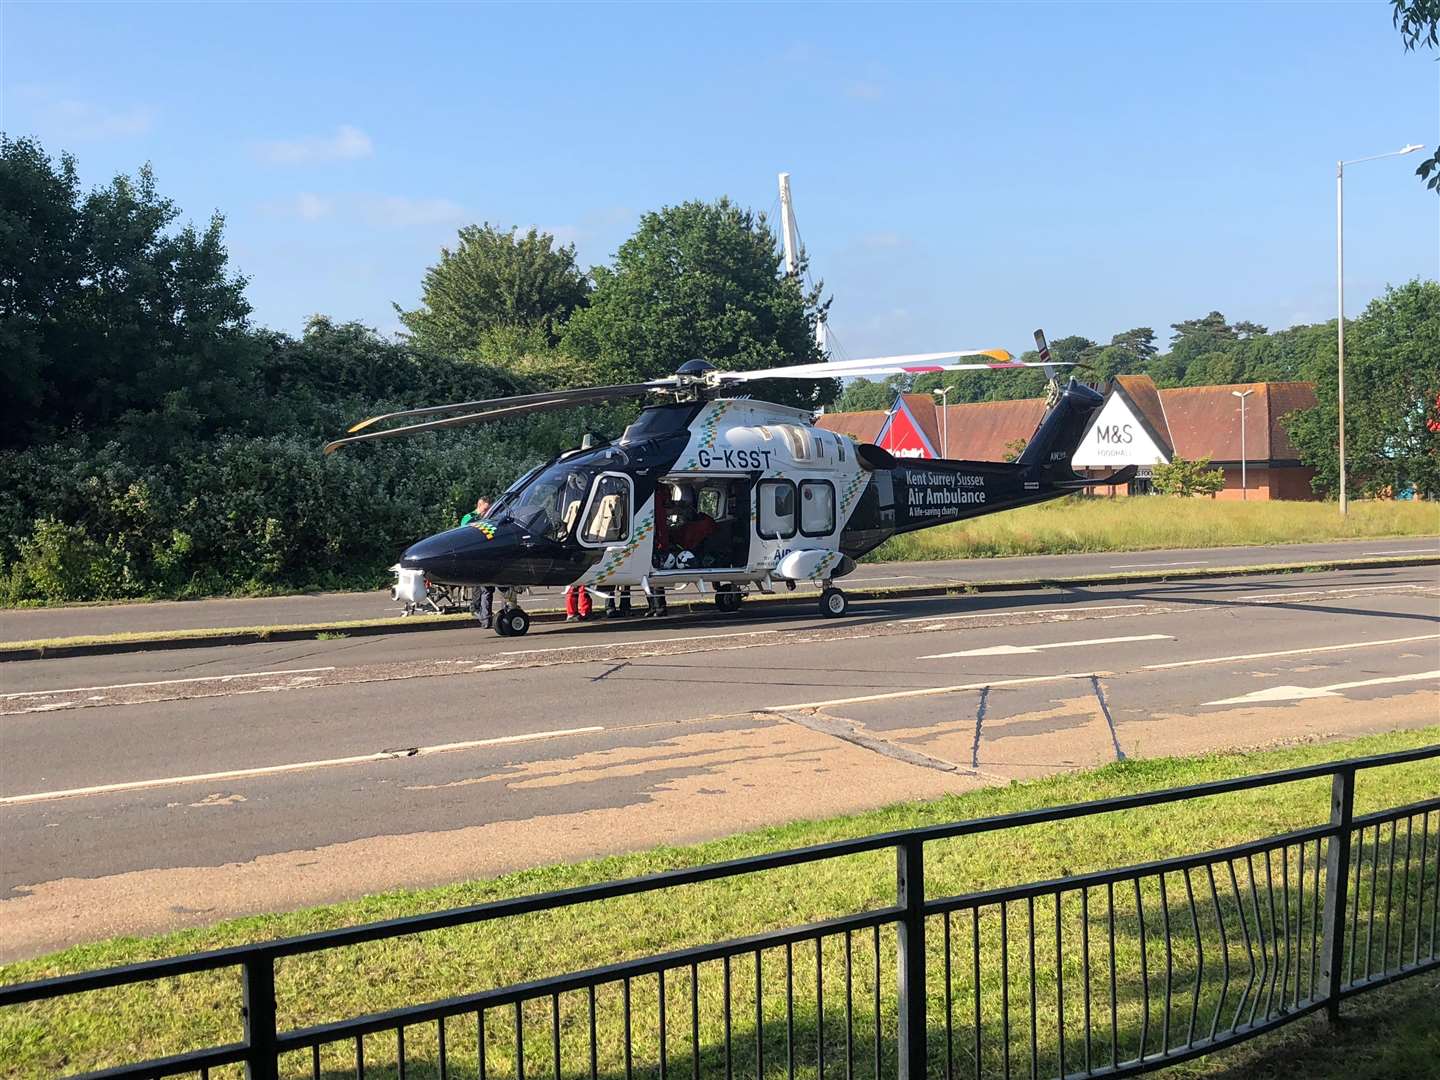 Steve Salter captured these pictures of the scene at Sainsbury's when the air ambulance came to assist (2462482)